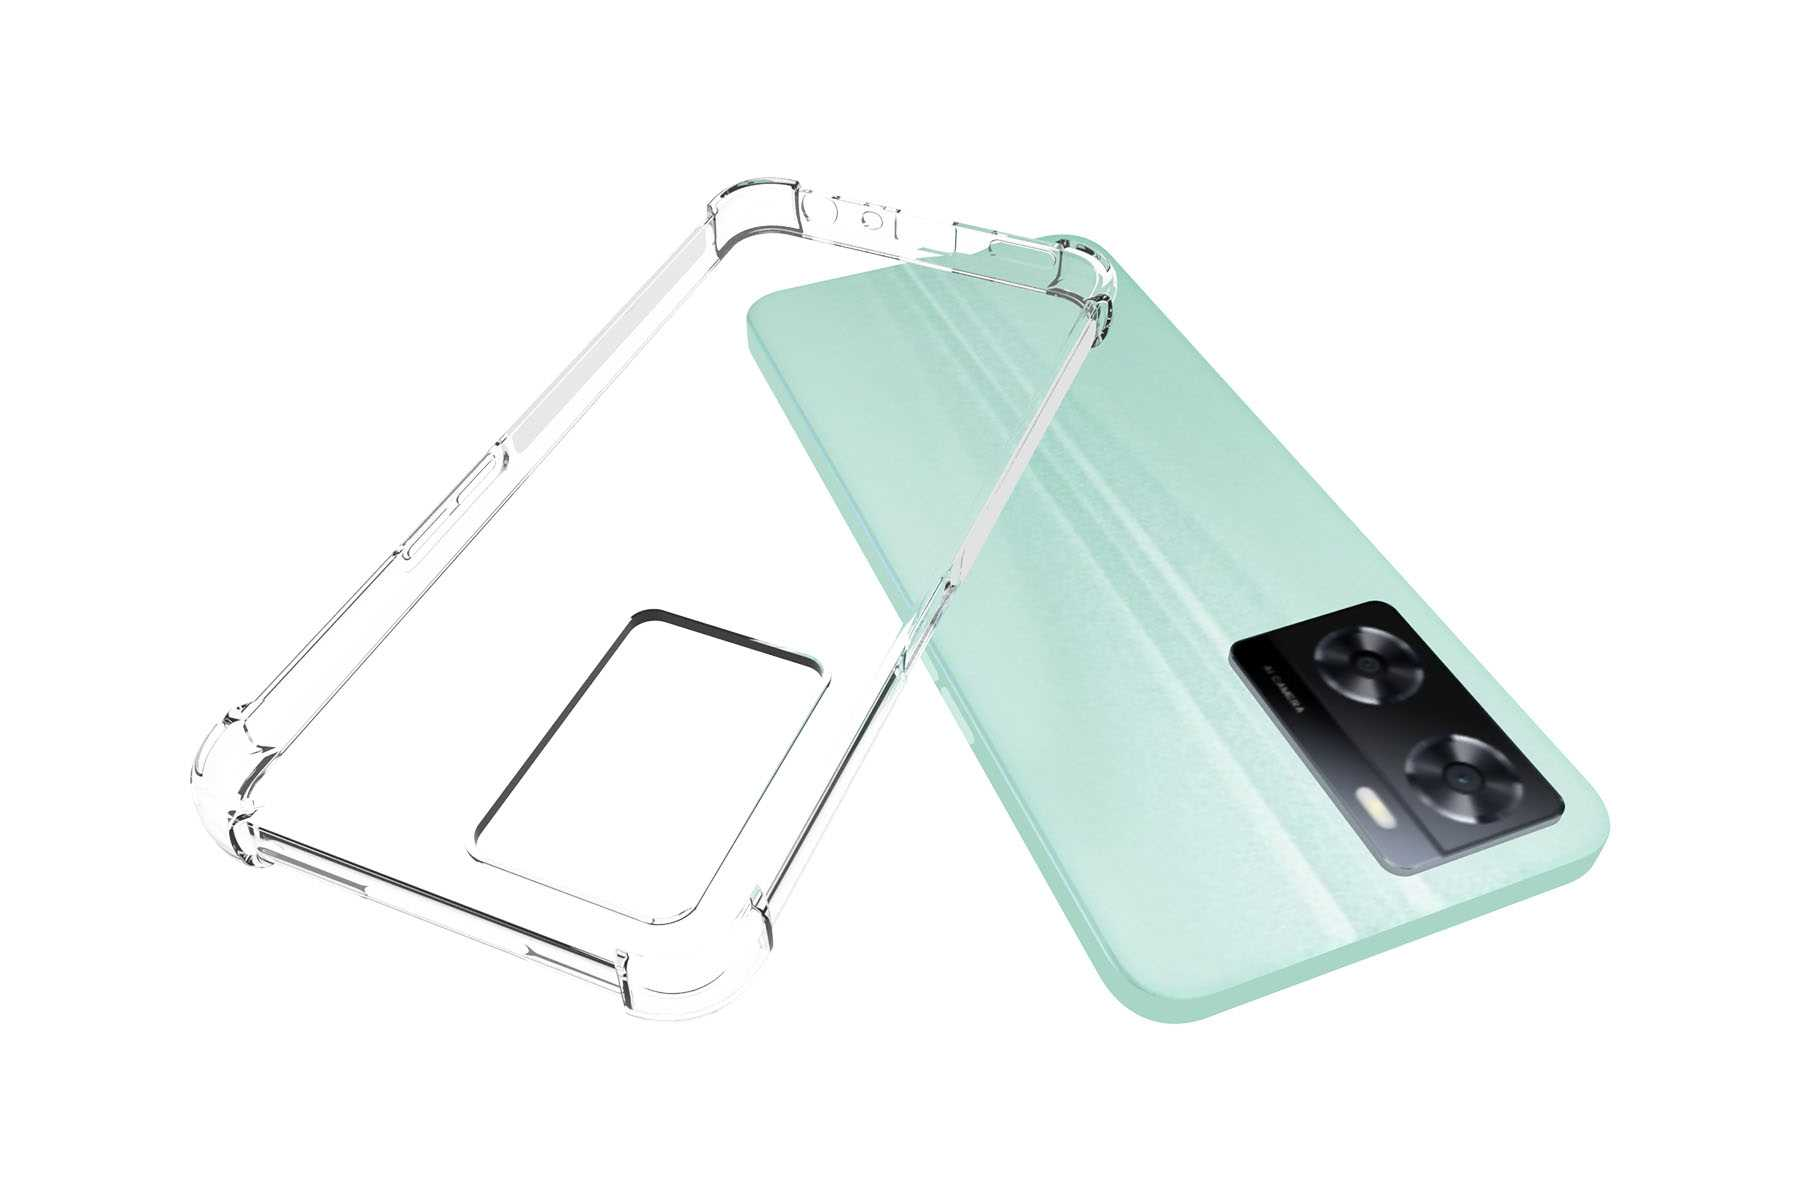 MTB MORE ENERGY Clear Backcover, Oppo, A57s, Transparent Case, Armor